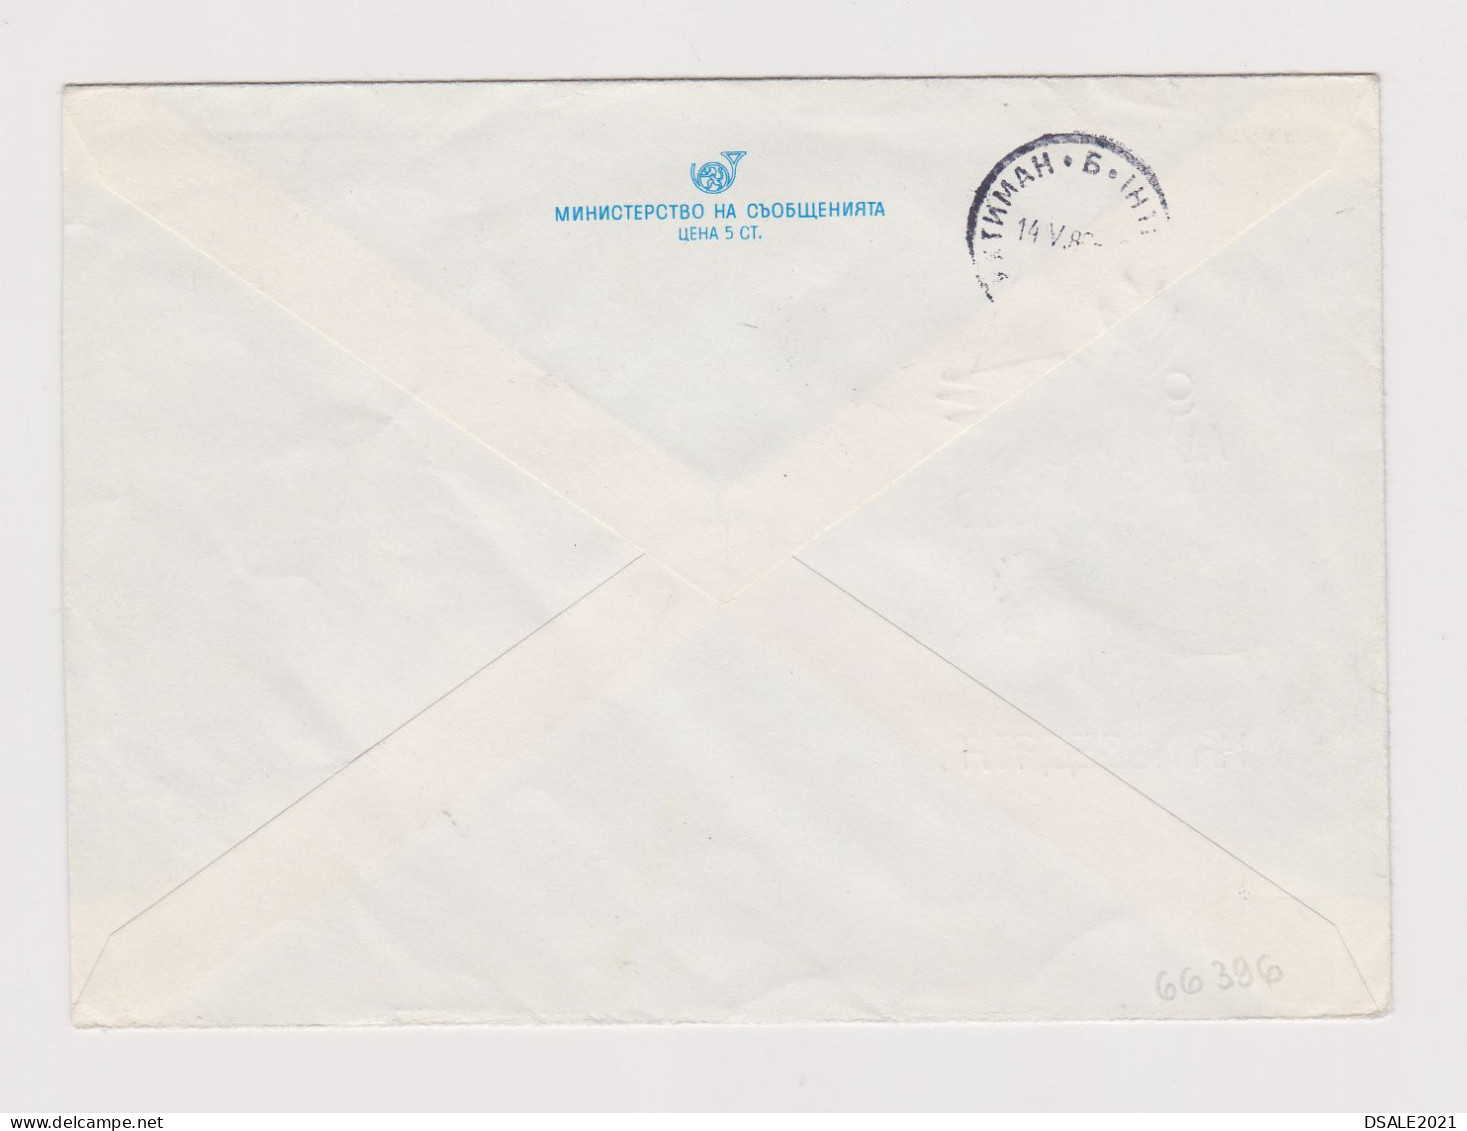 Bulgaria Bulgarien Bulgarie 1980 Postal Stationery Cover PSE, Entier, Propaganda 9 May-Victory Day (66396) - Covers